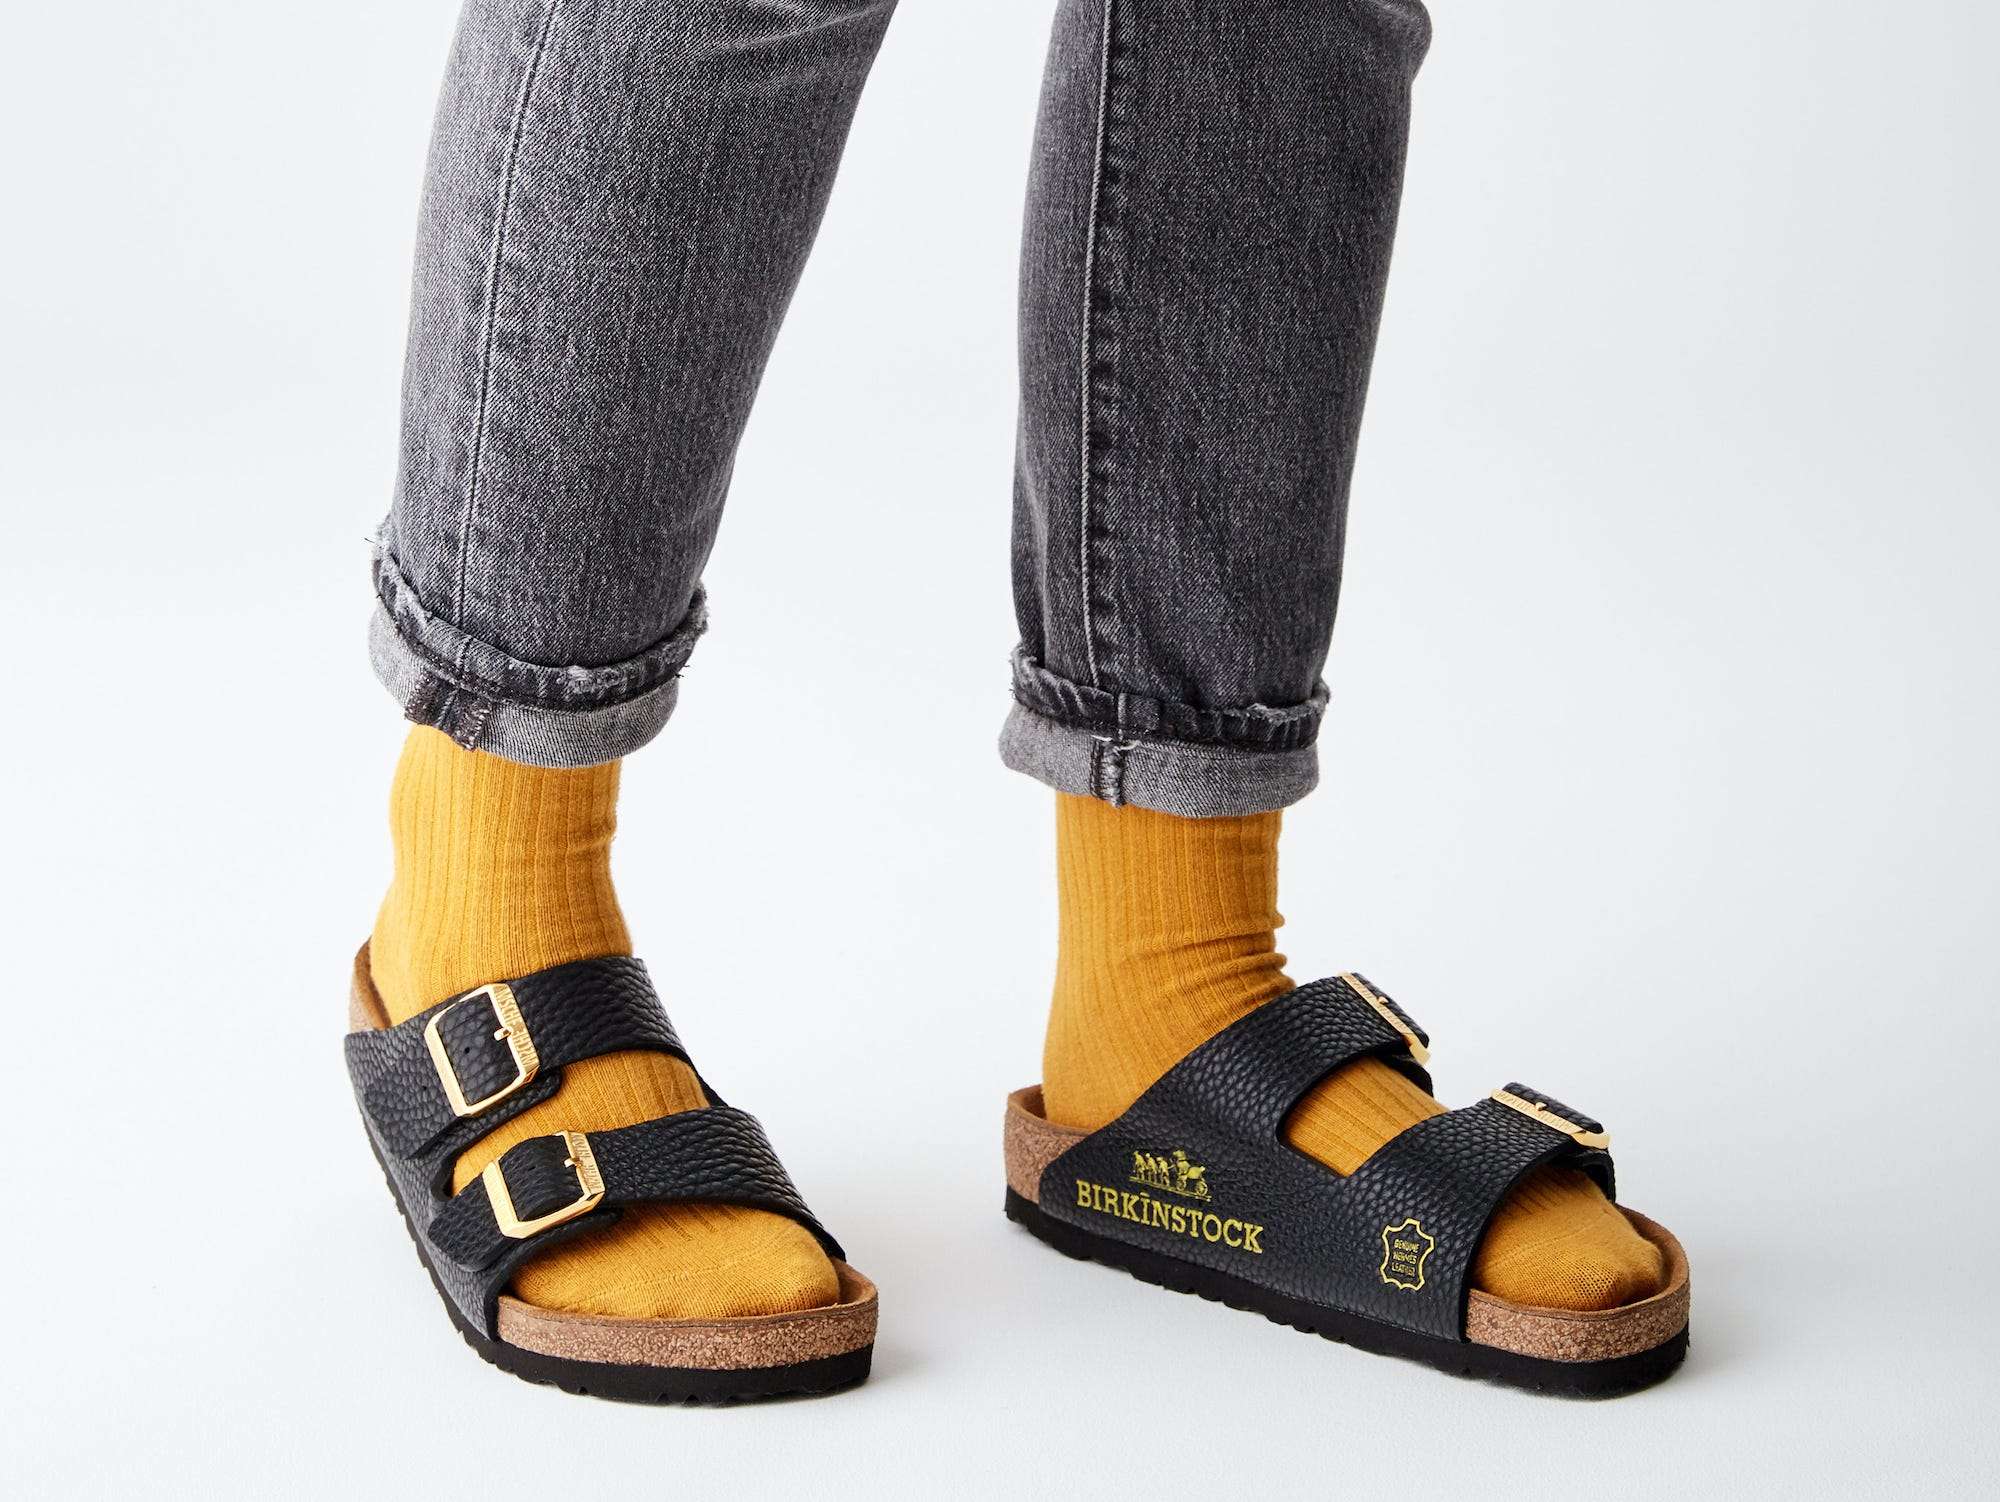 what are birkenstocks made out of